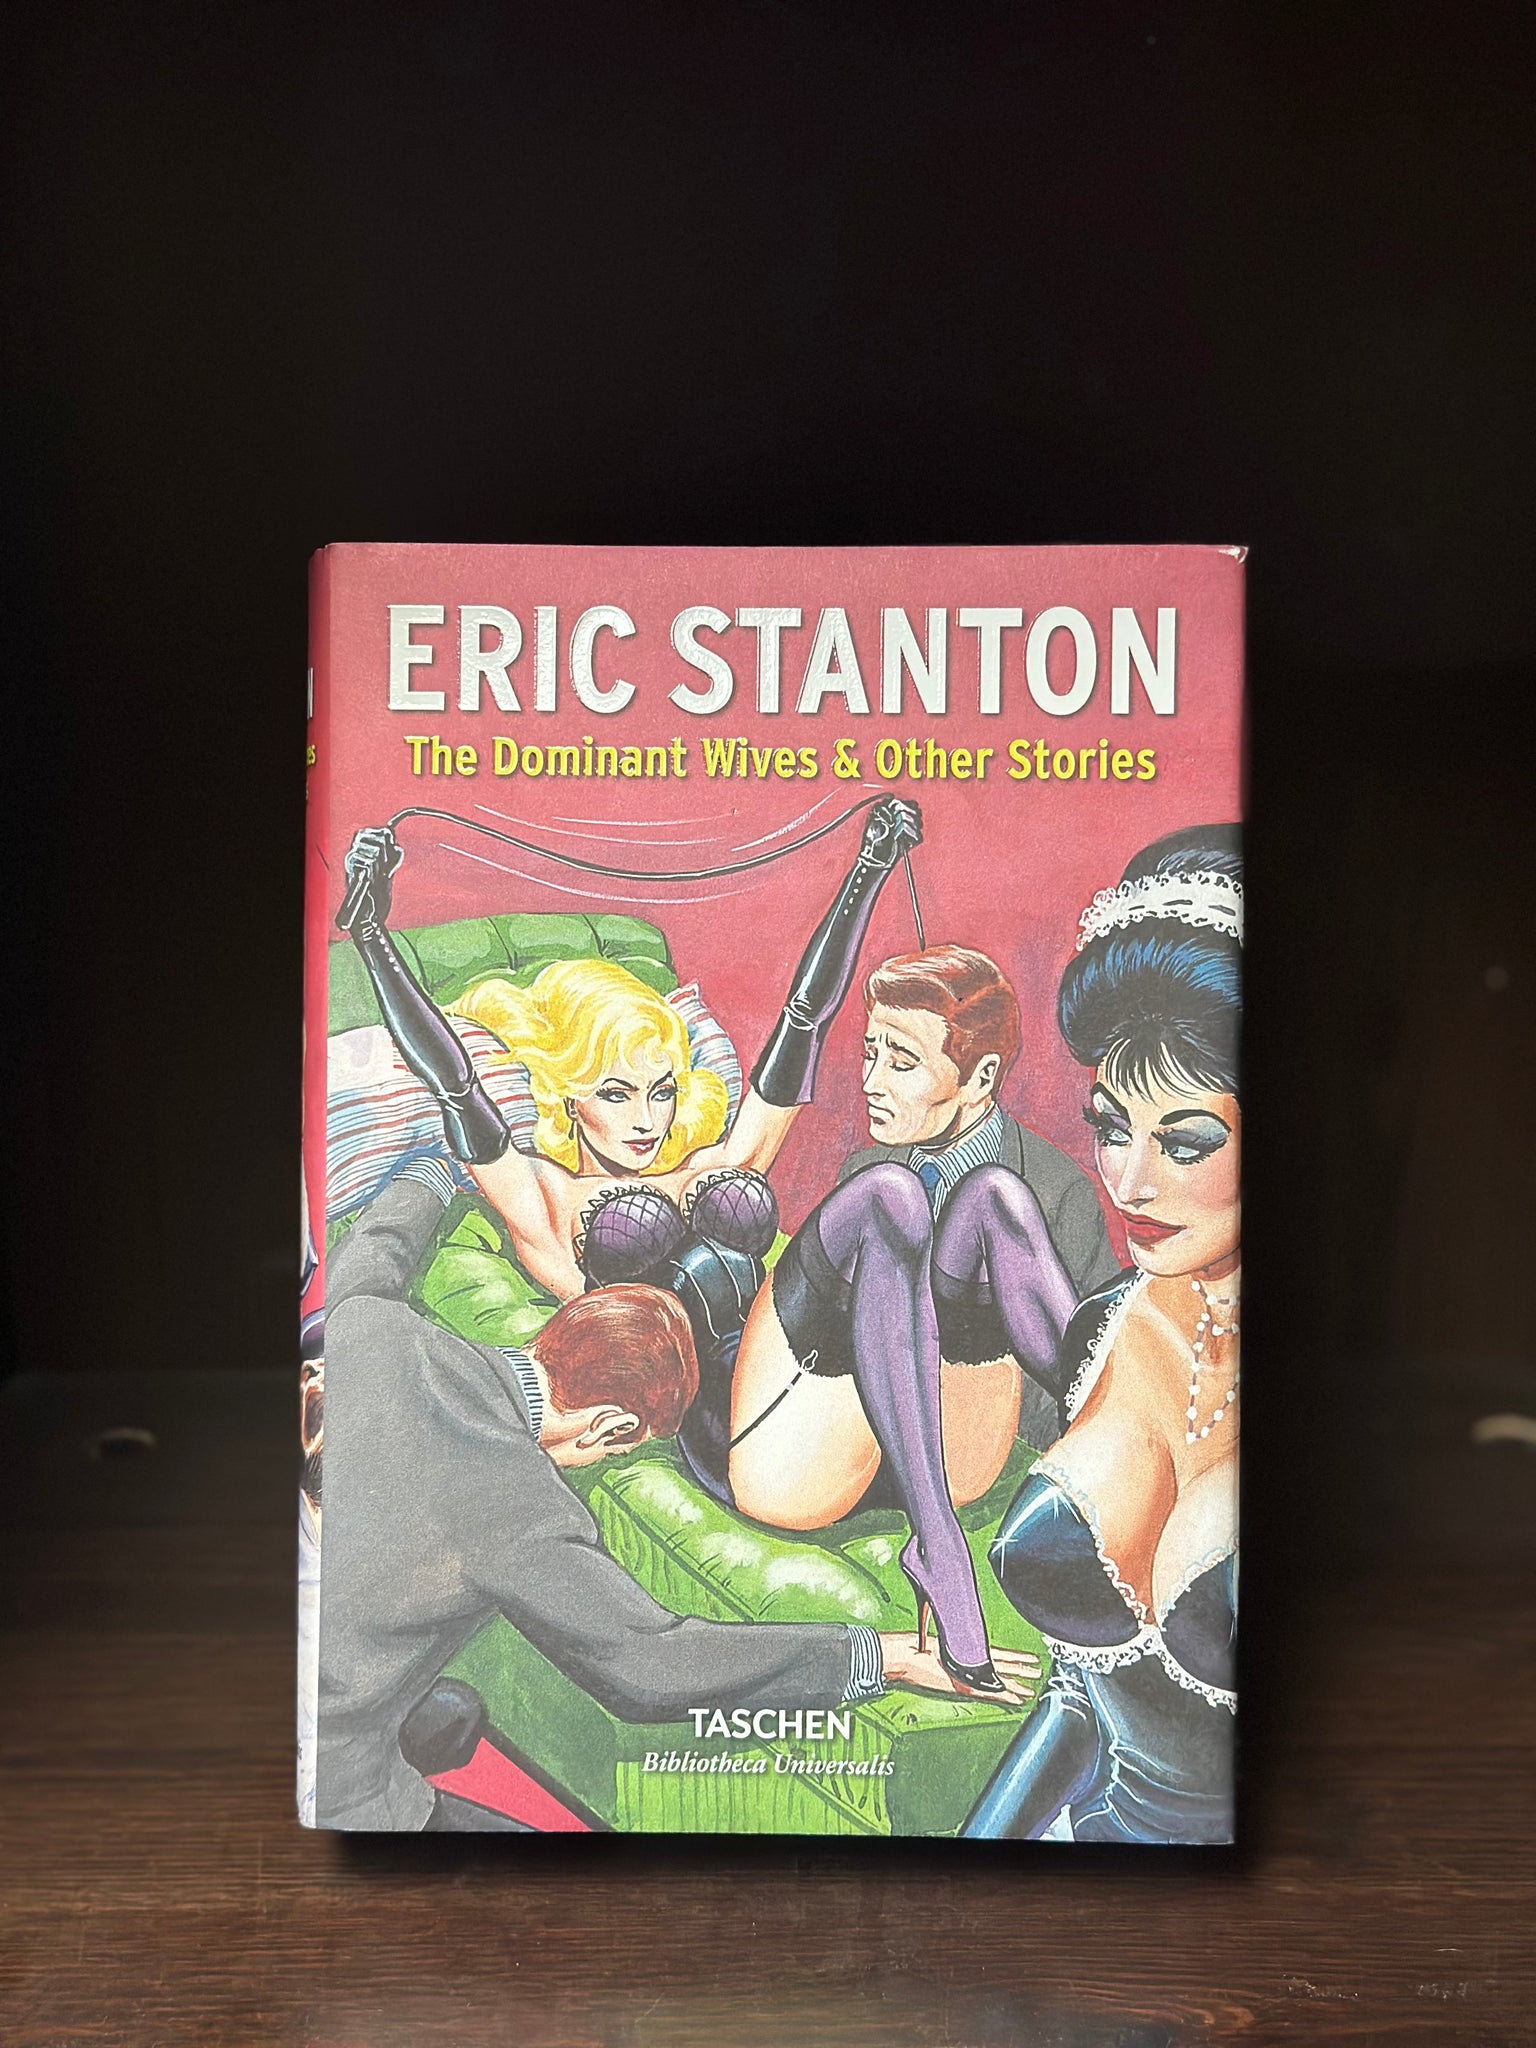 The Dominant Wives & Other Stories by Eric Stanton